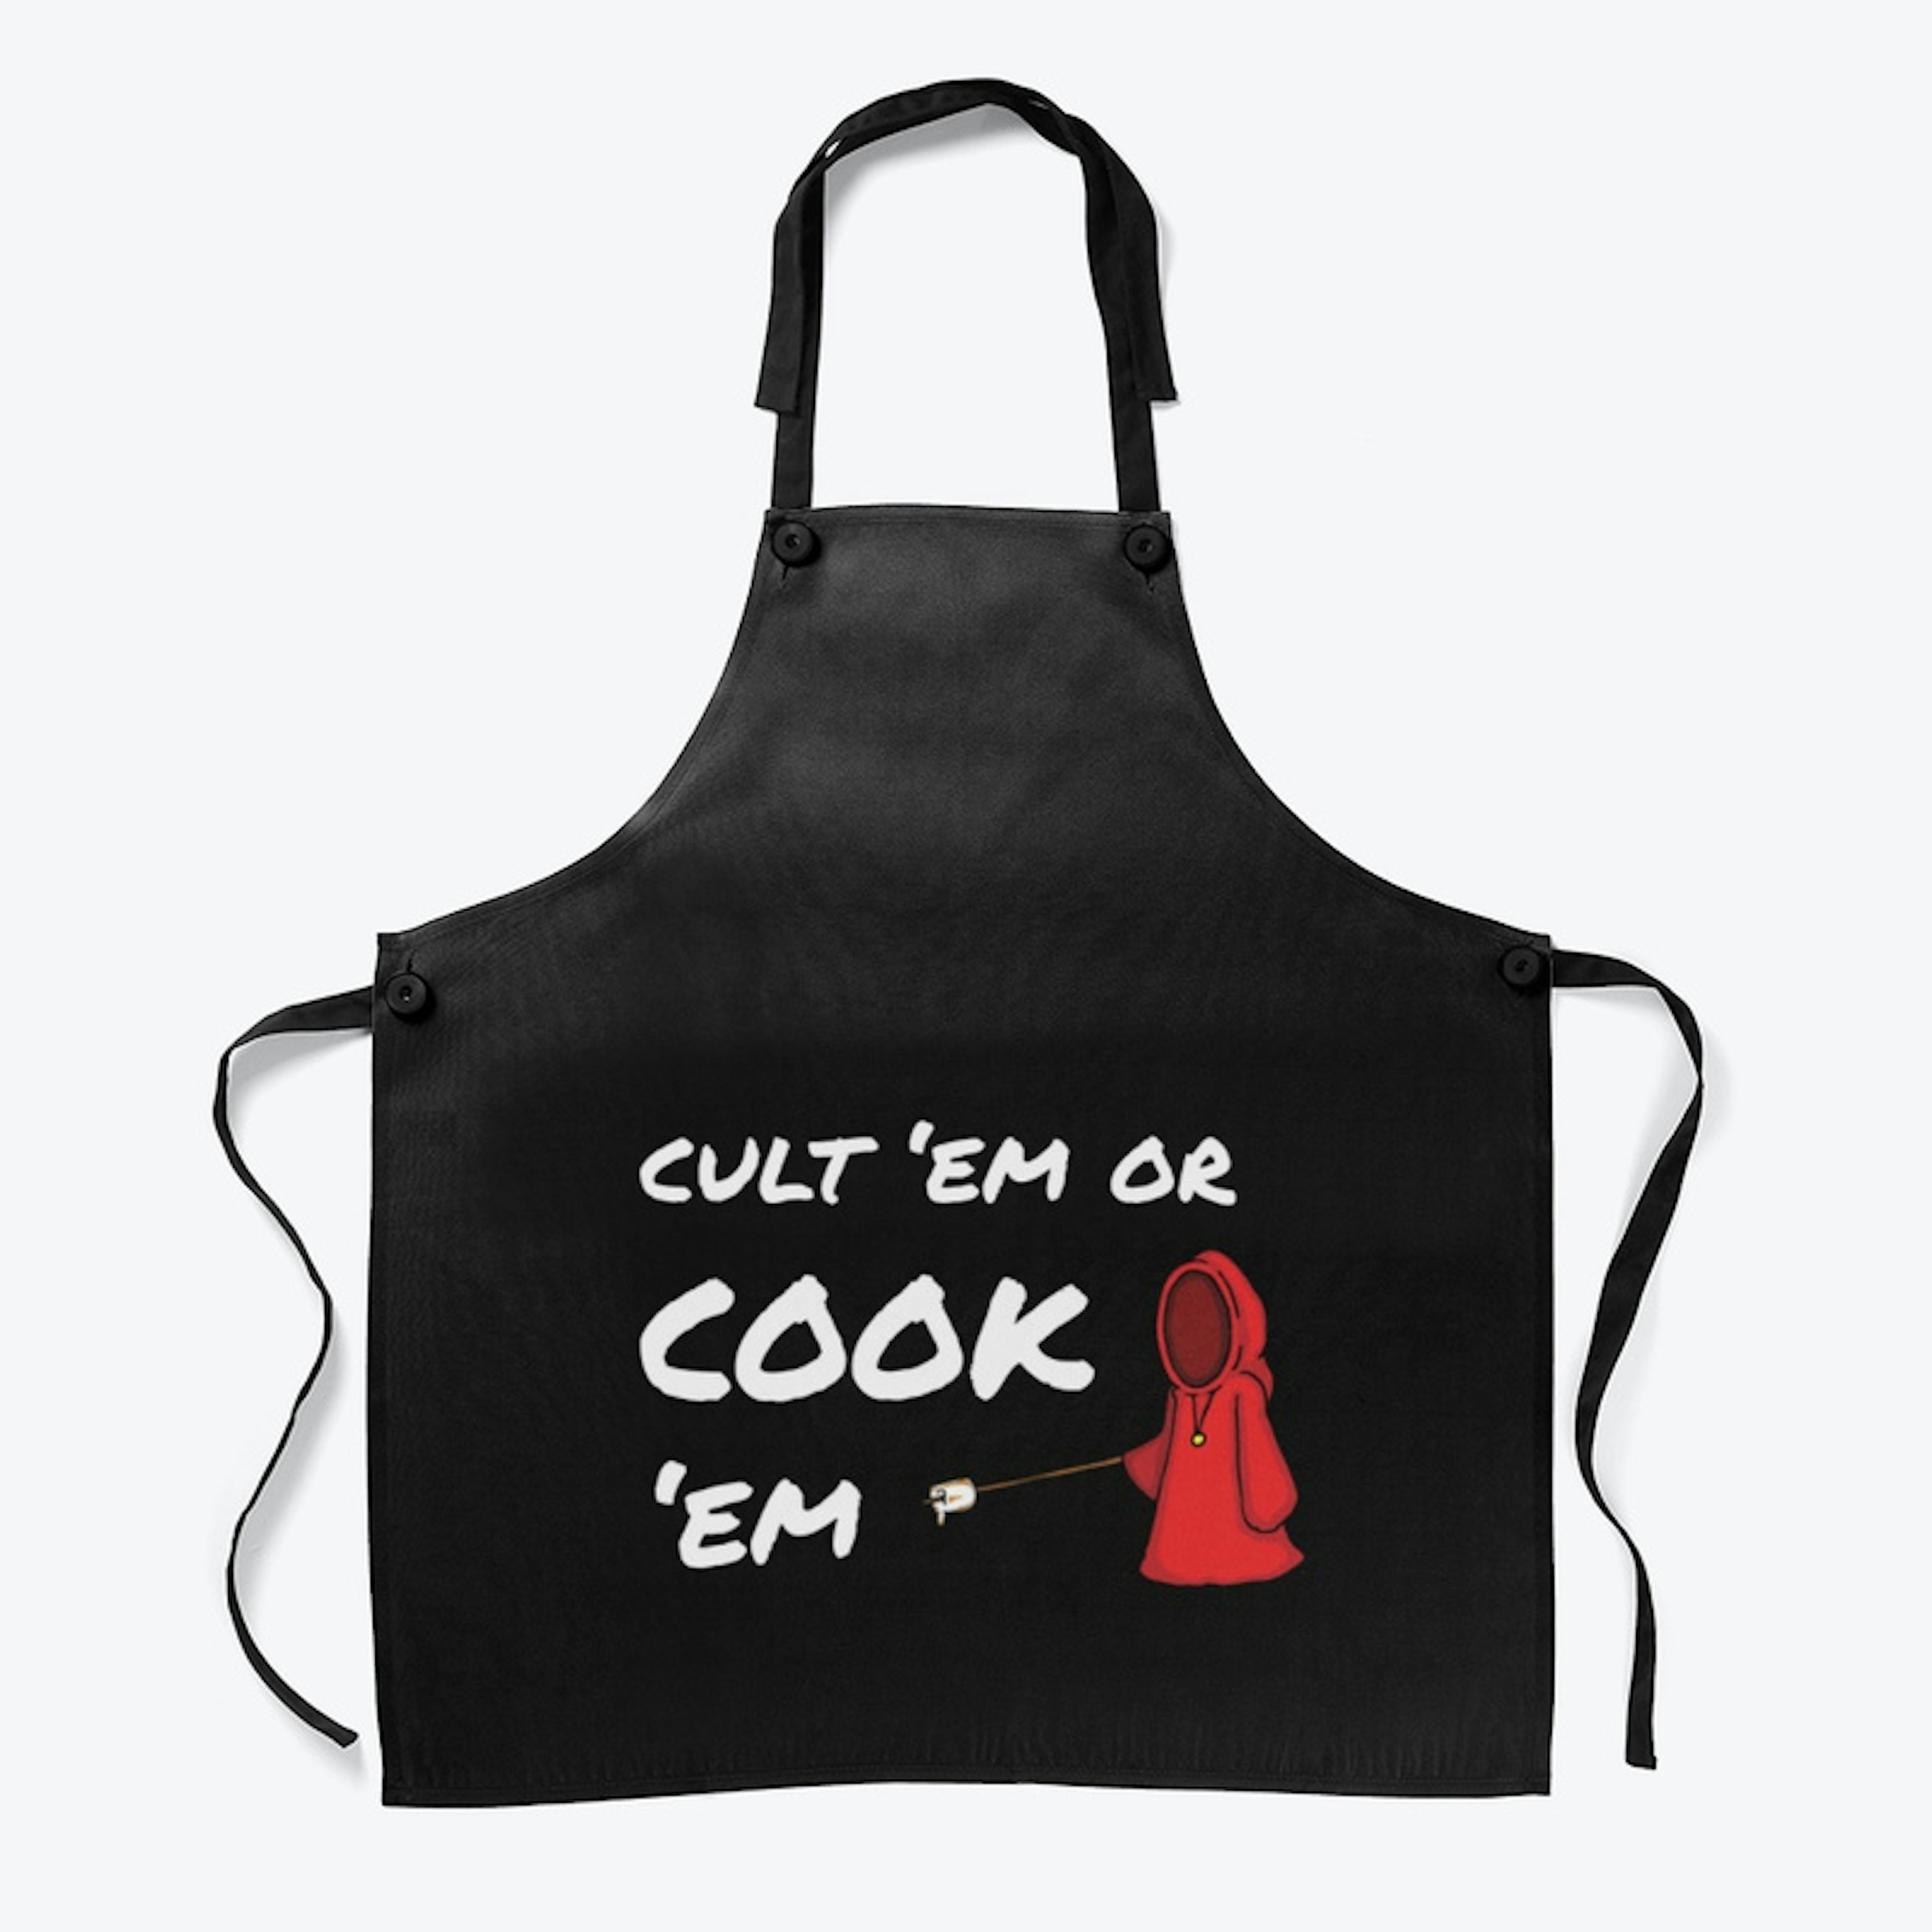 Don't Eat Cultists